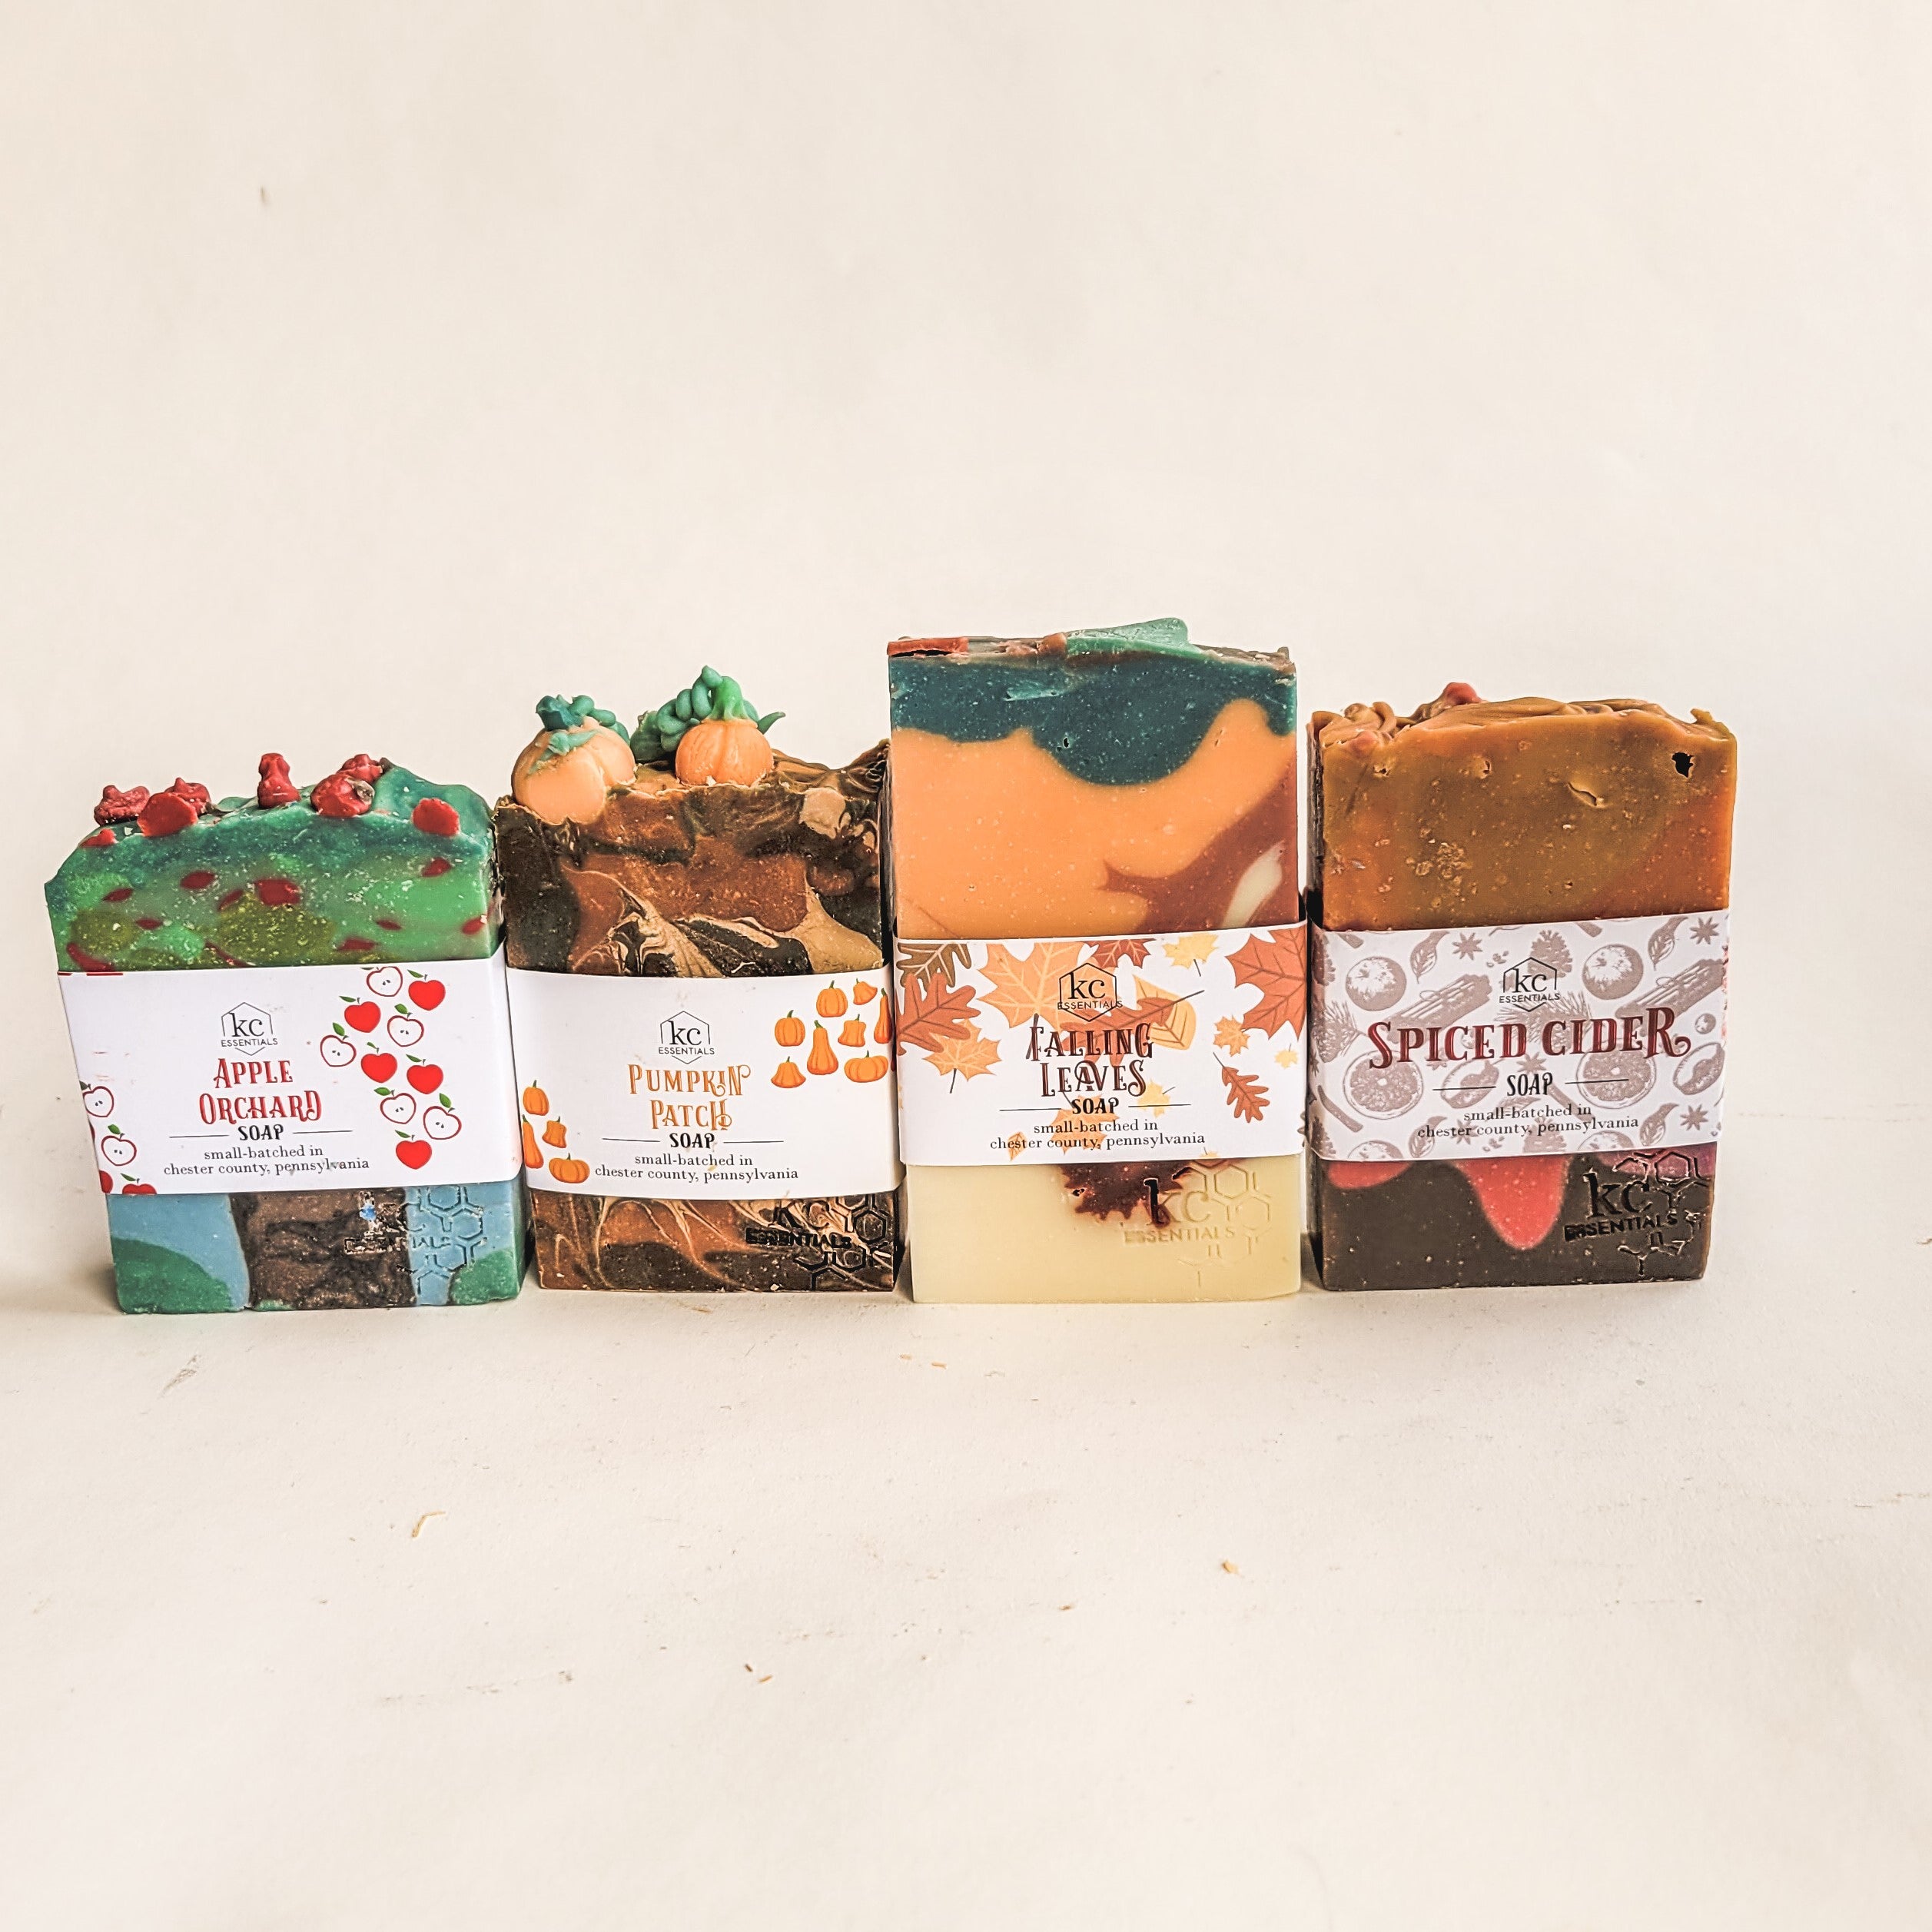 kc Essential Set of 4 Artisan-Crafted Fall Soaps